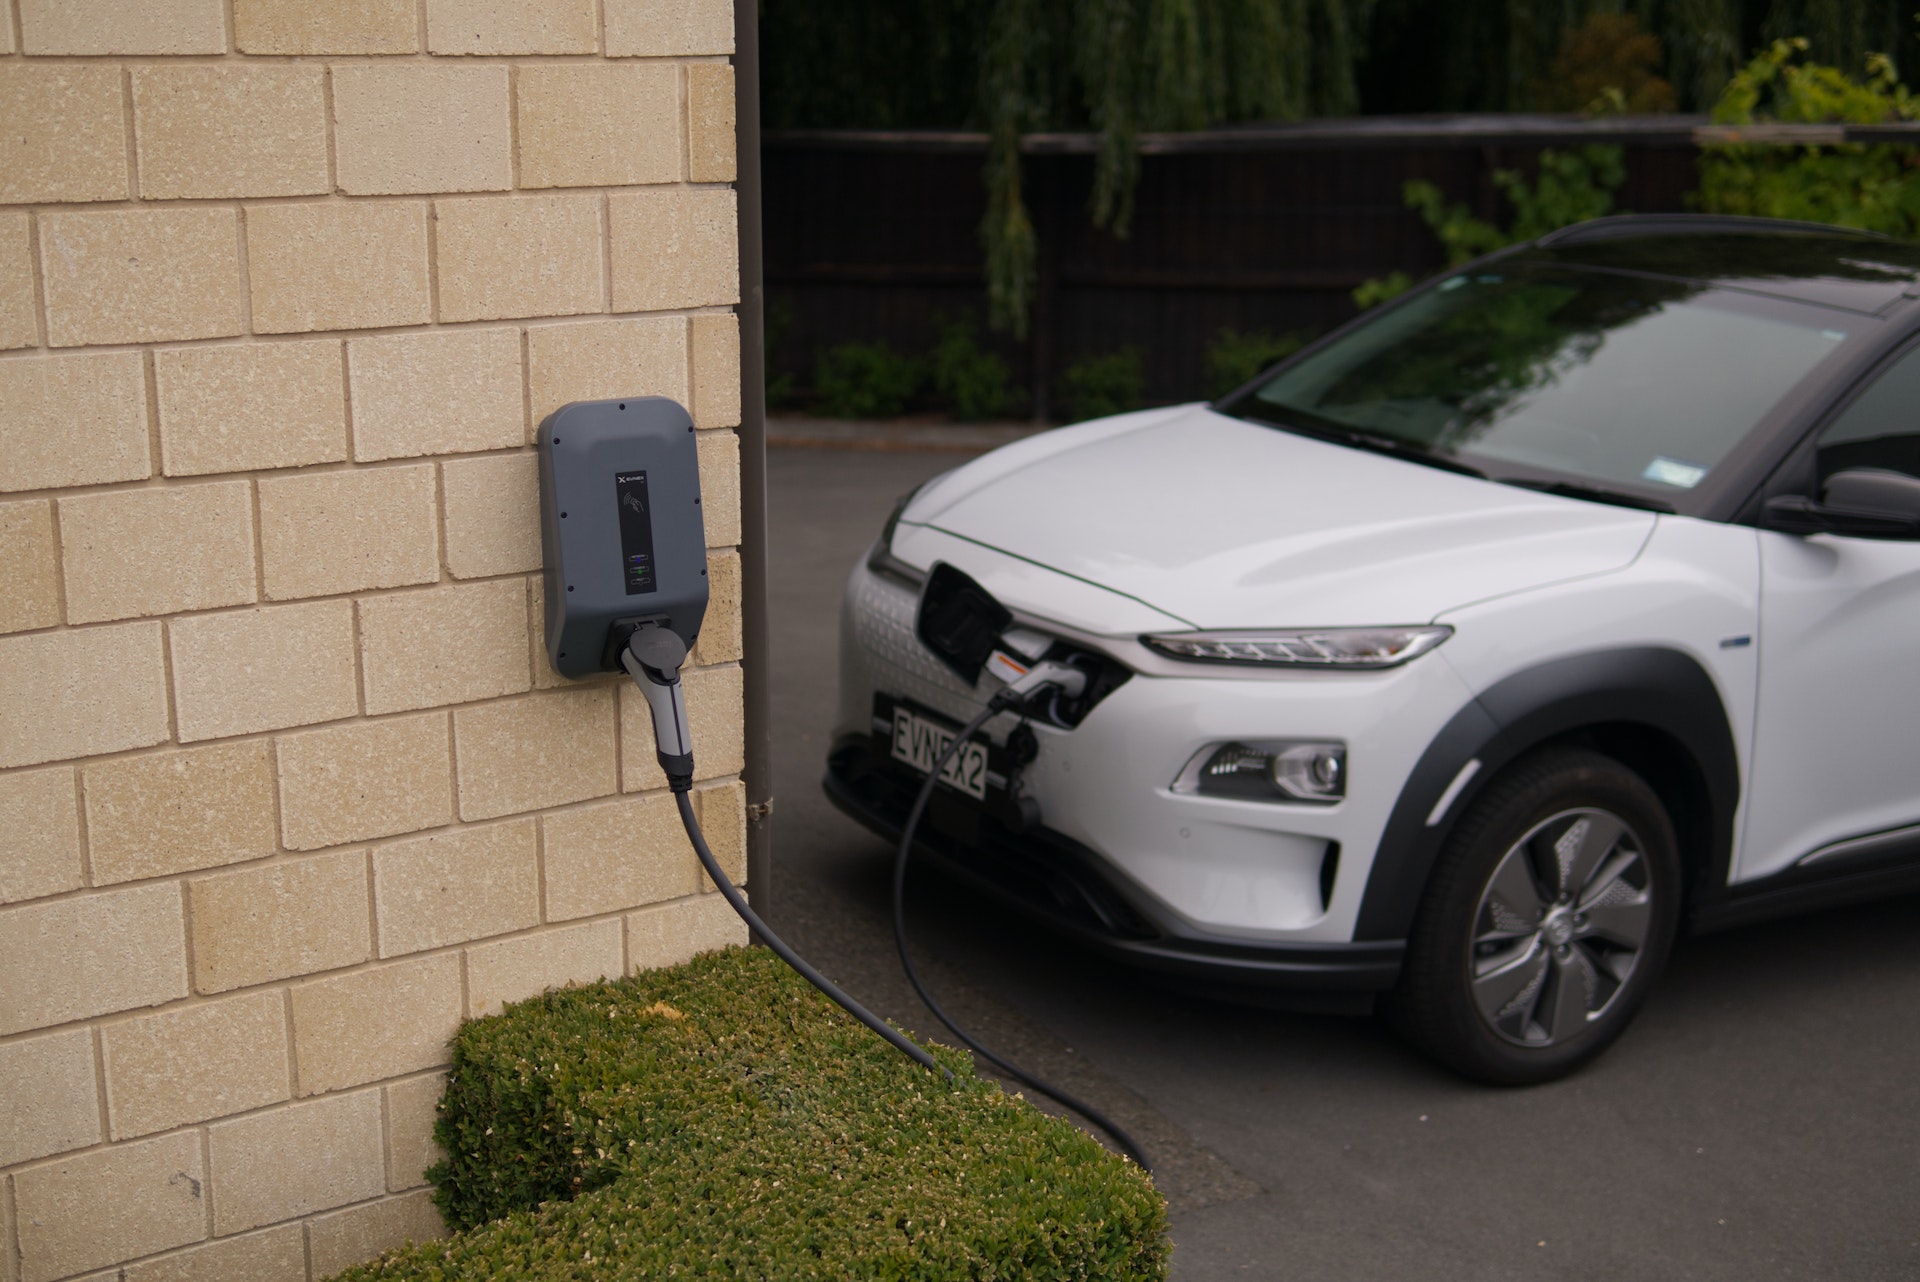 Smart charging solutions for home EV charging - Fjordkraft and CURRENT